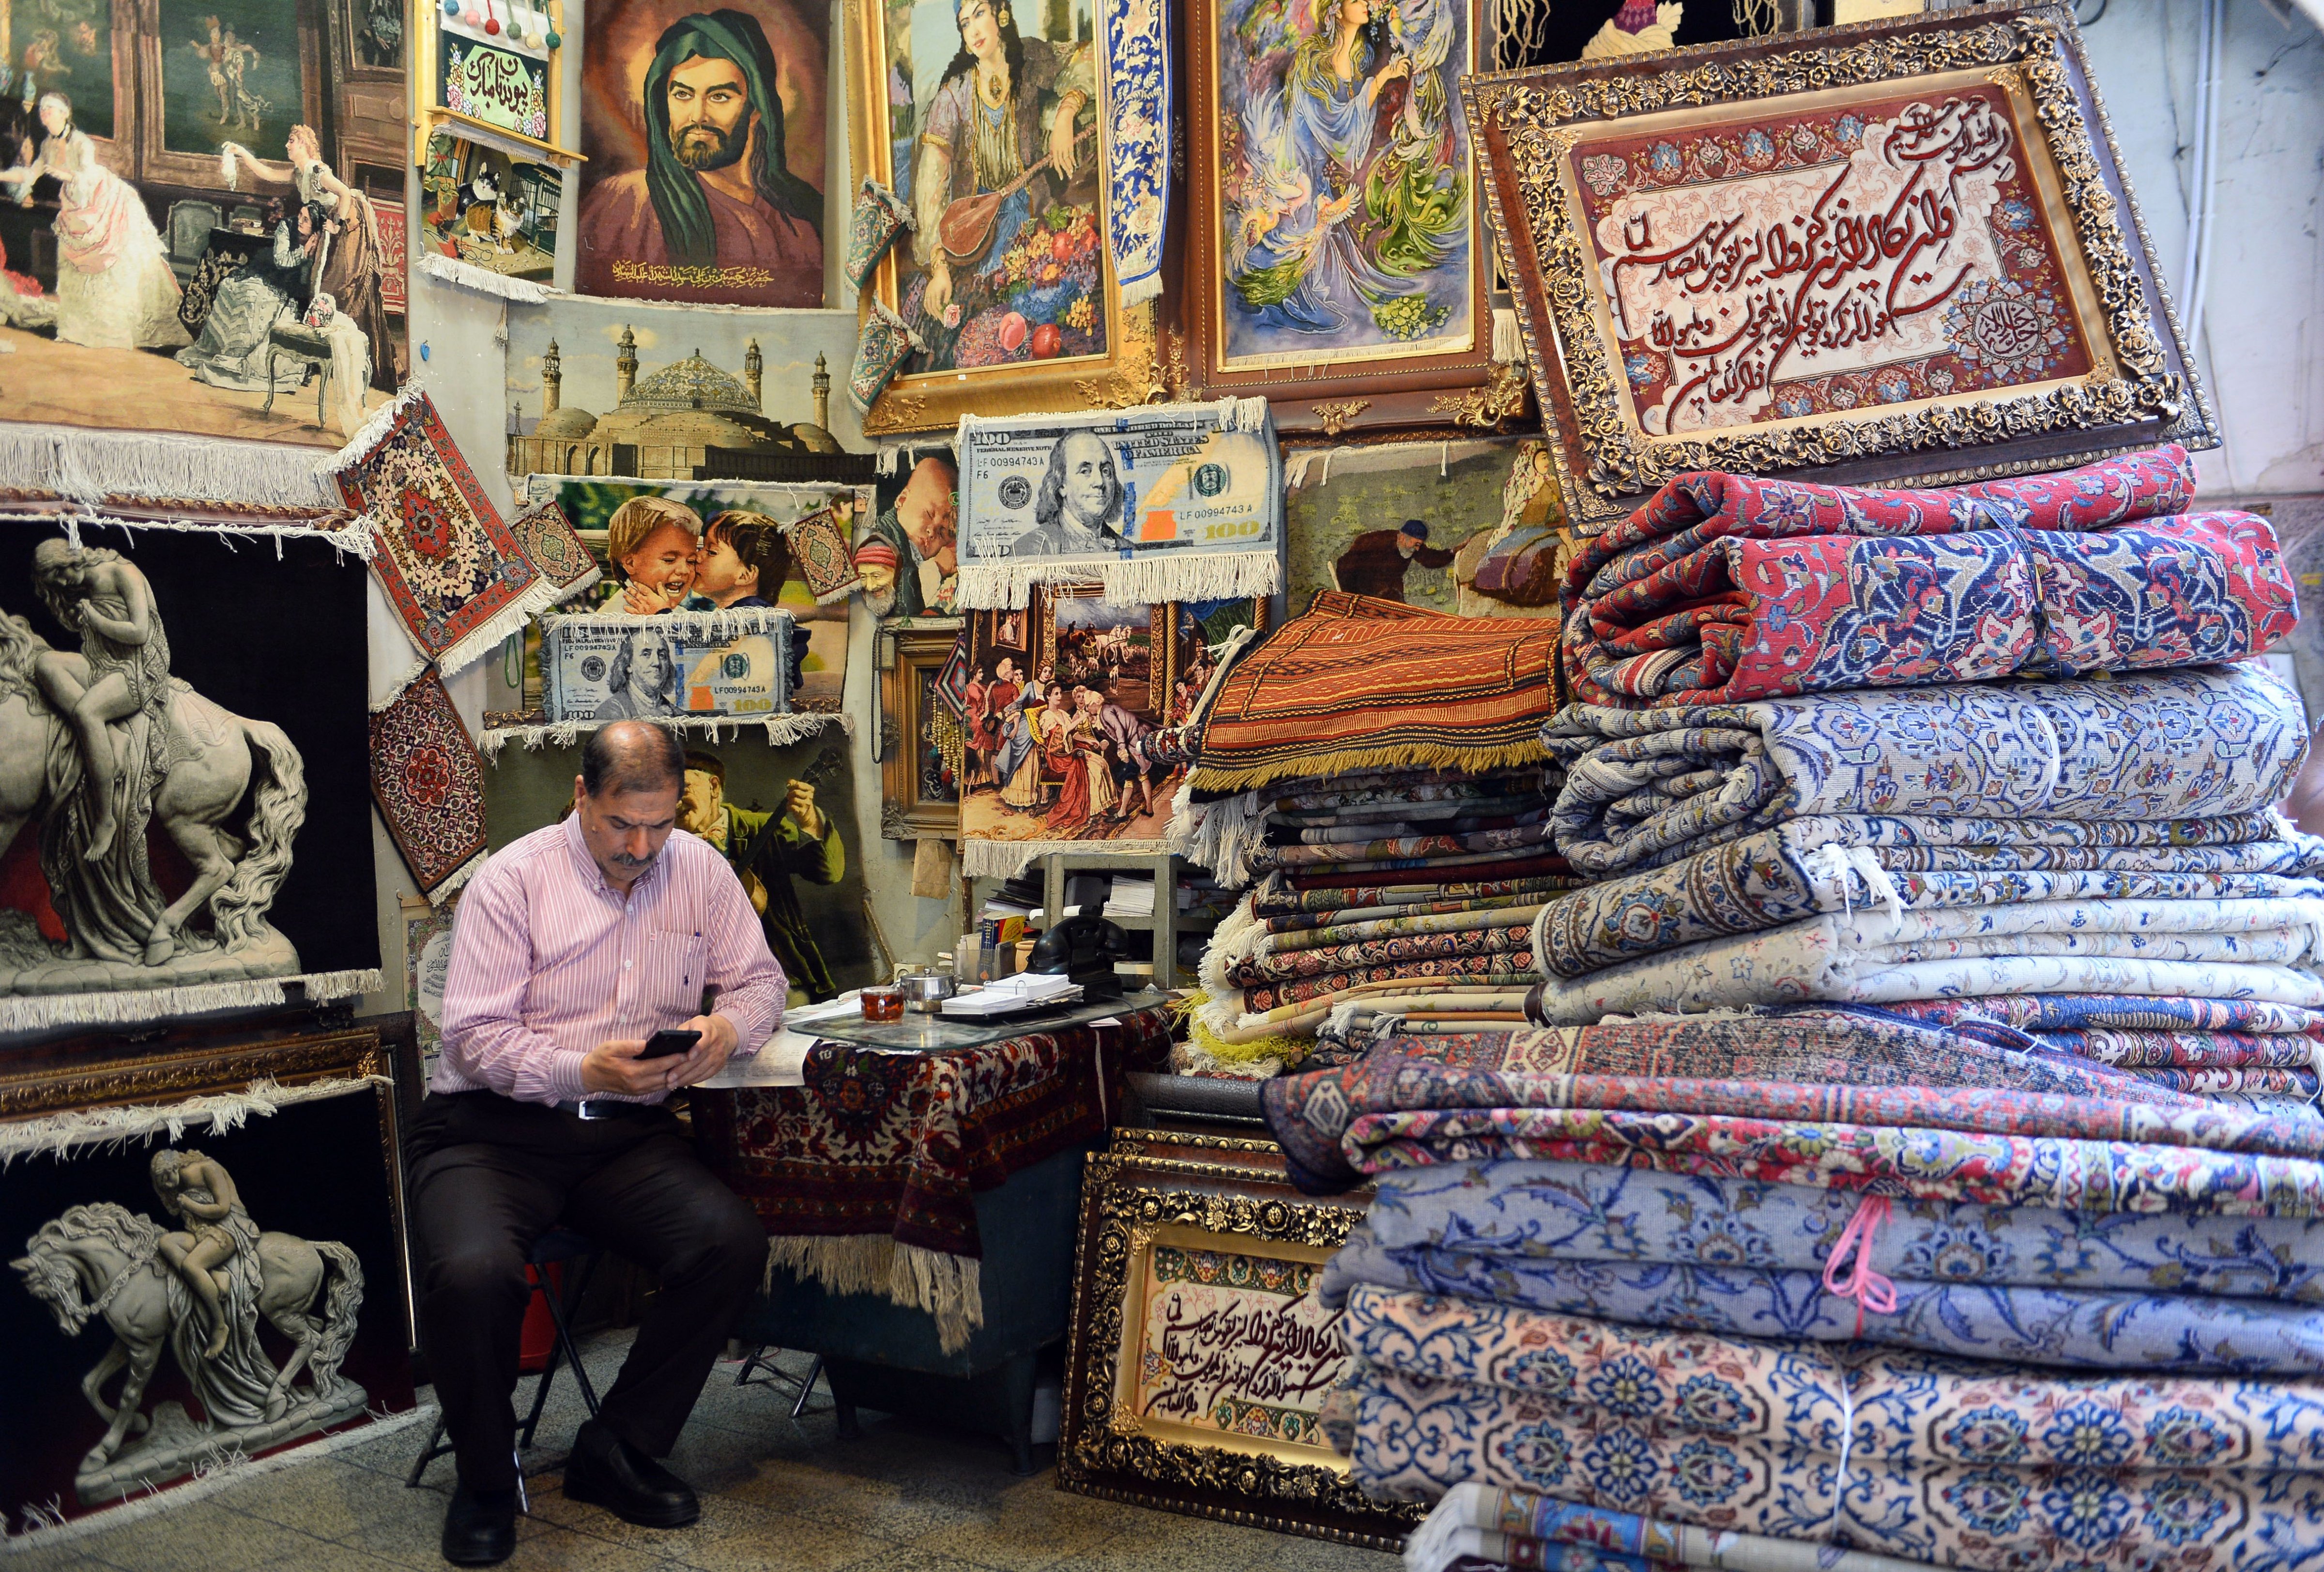 A carpet seller is seen at a bazaar in Tehran a day before the U.S. re-enforced sanctions against Iran on Aug. 7, 2018 (Anadolu Agency—Getty Images)